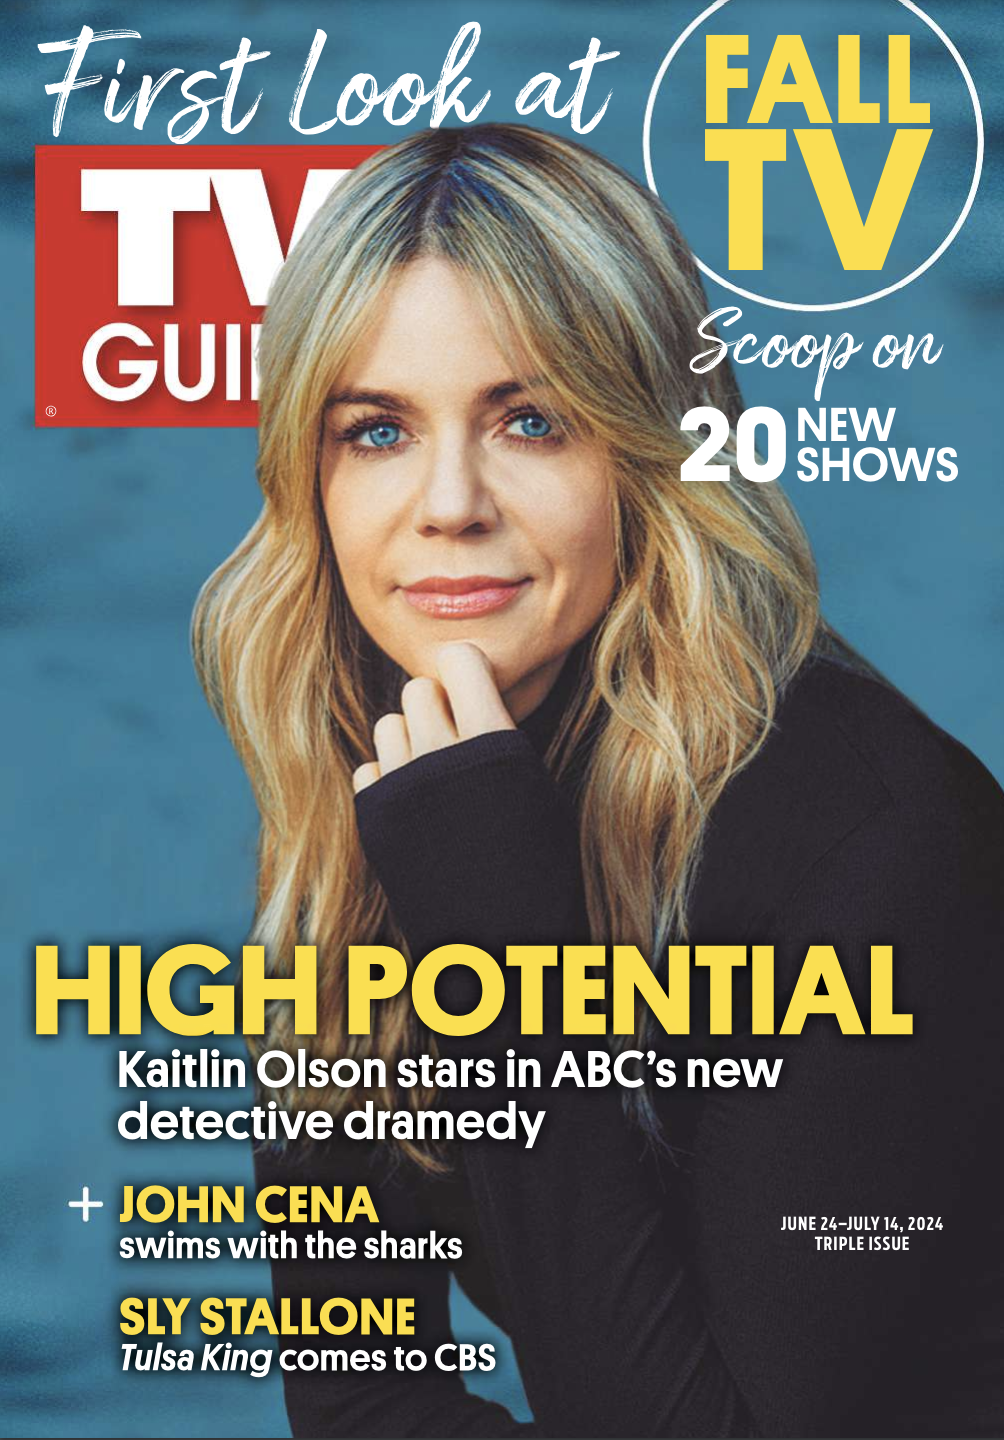 FIRST LOOK AT FALL TV; SCOOP ON 20 NEW SHOWS; HIGH POTENTIAL: Kaitline Olson stars in ABC's new detective dramedy; JOHN CENA swims with the sharks; SLY STALLONE Tulsa King comes to CBS